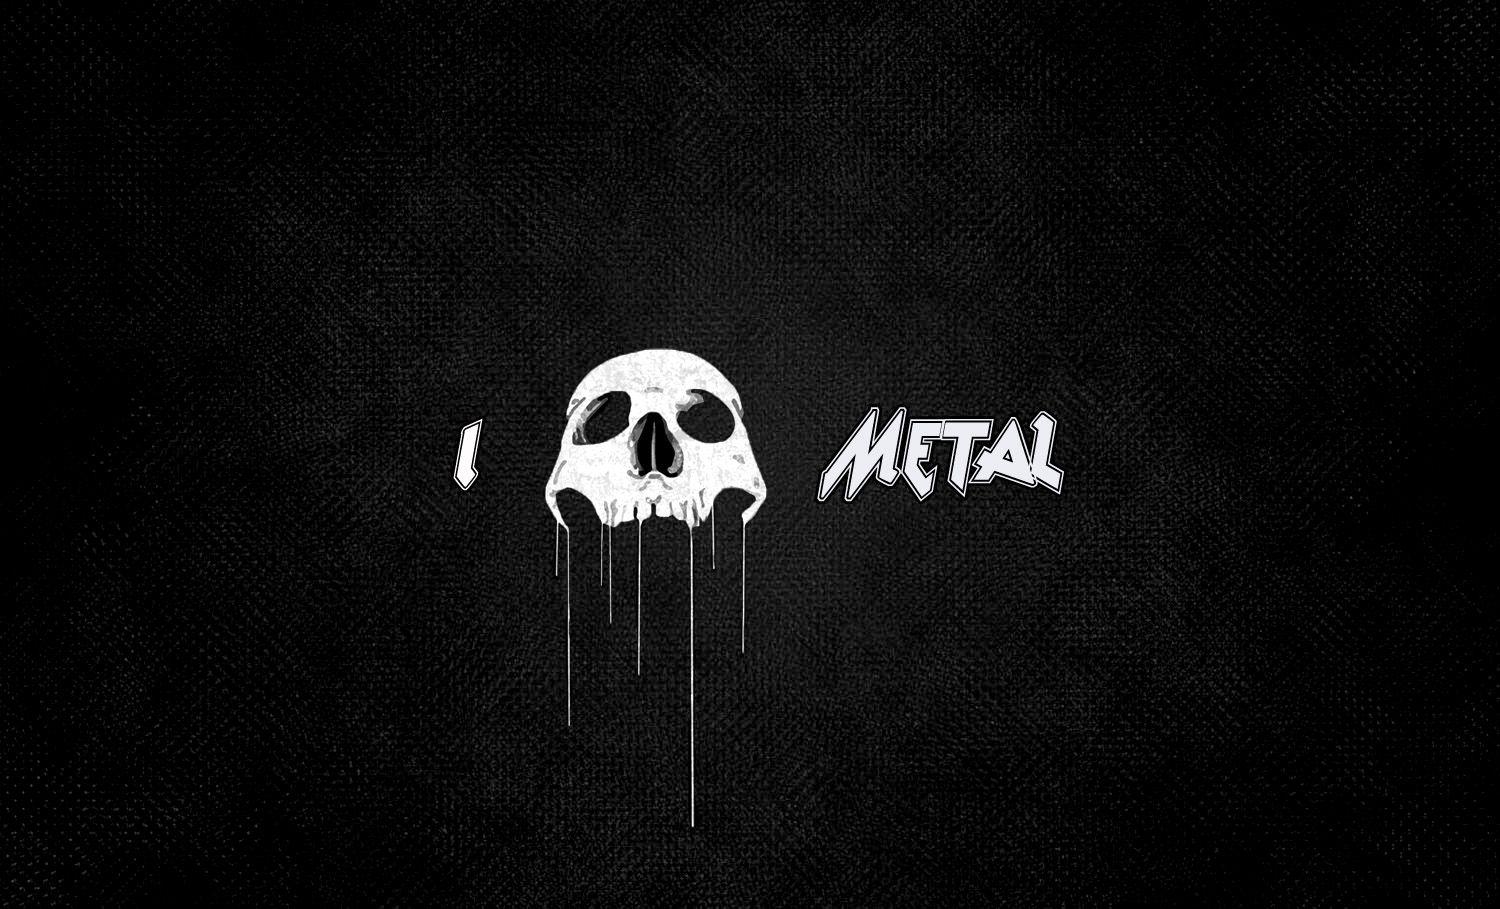 Heavy Metal Bands Wallpapers  Band wallpapers Heavy metal bands Heavy  metal music